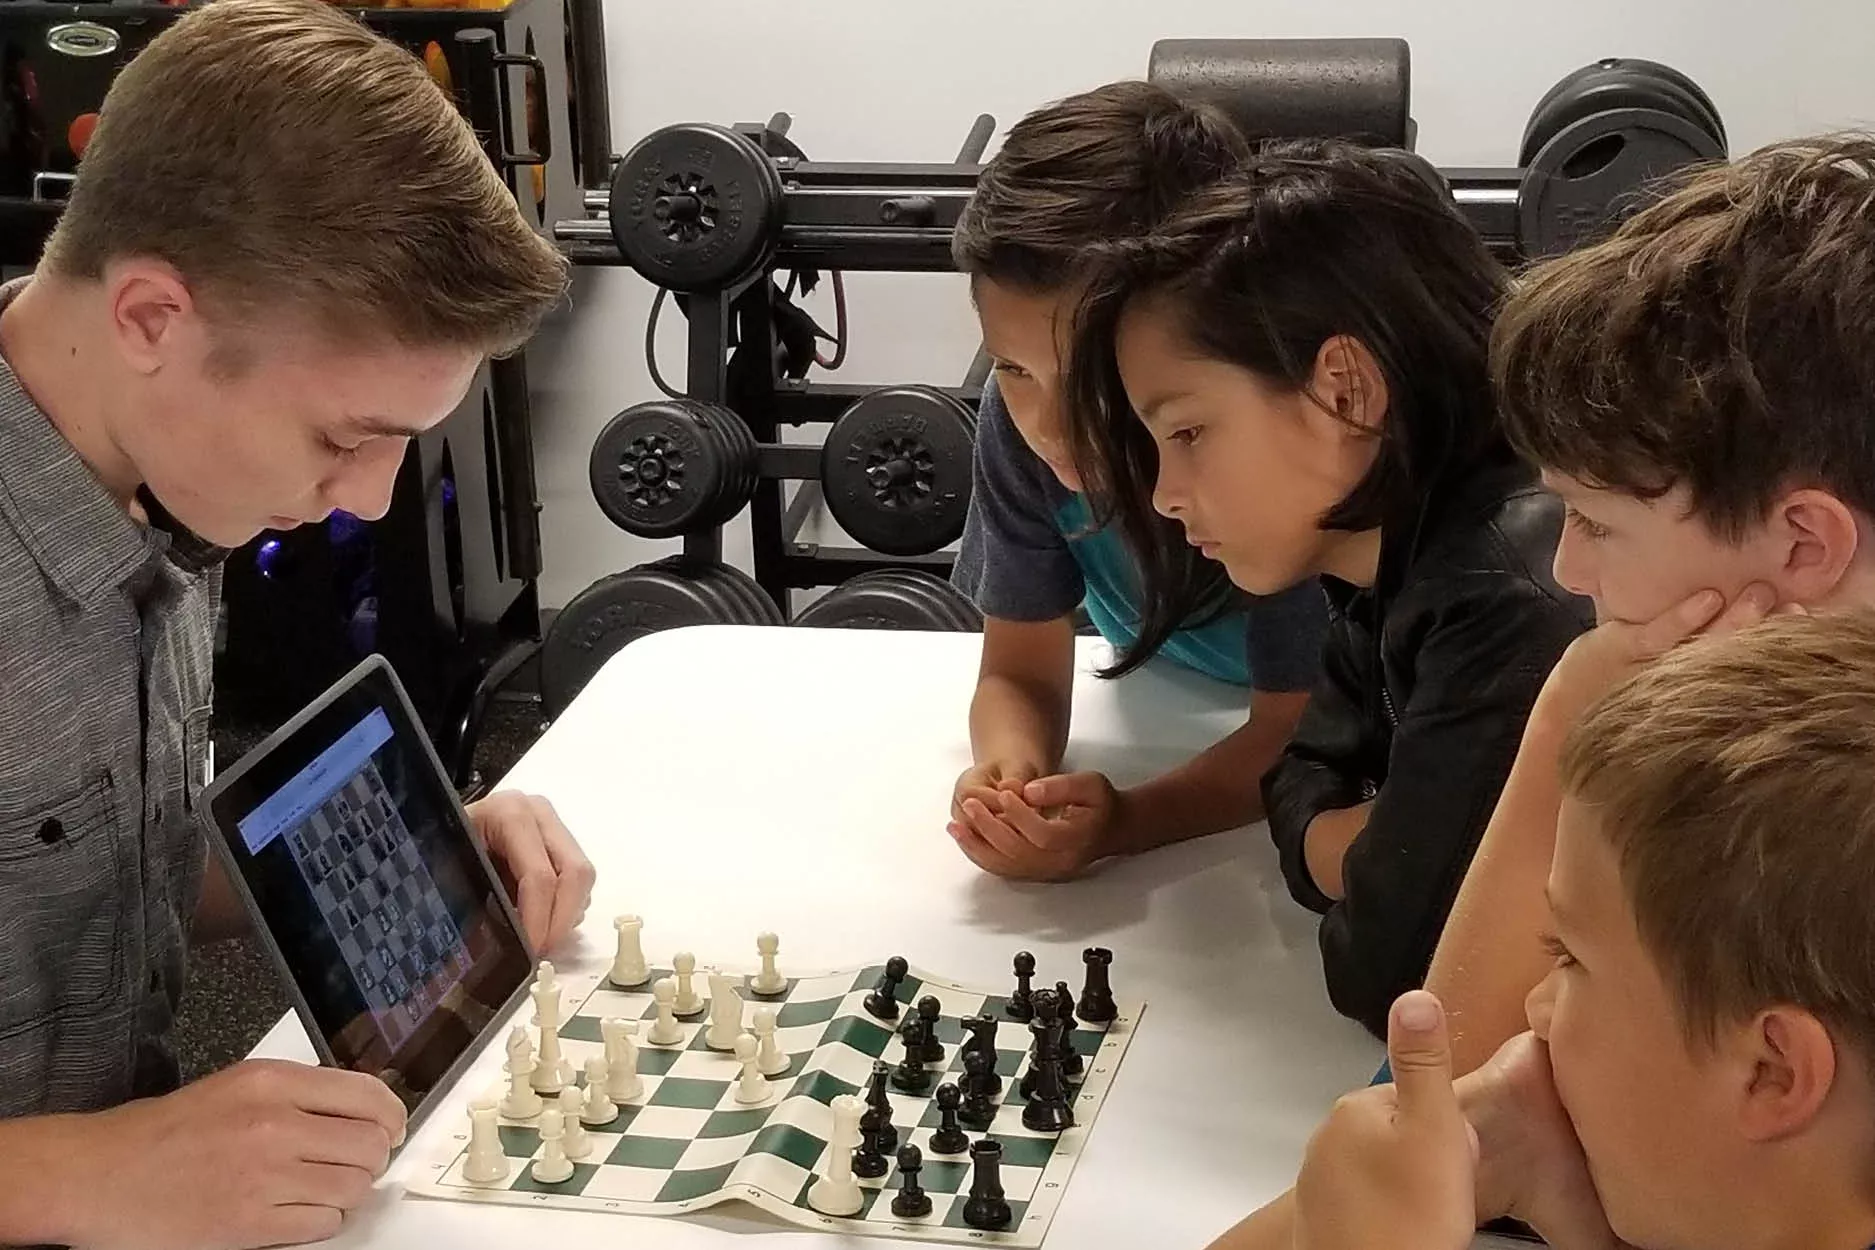 Four chess students gathered around instructor, chess board, and iPad, learning the rules of the game